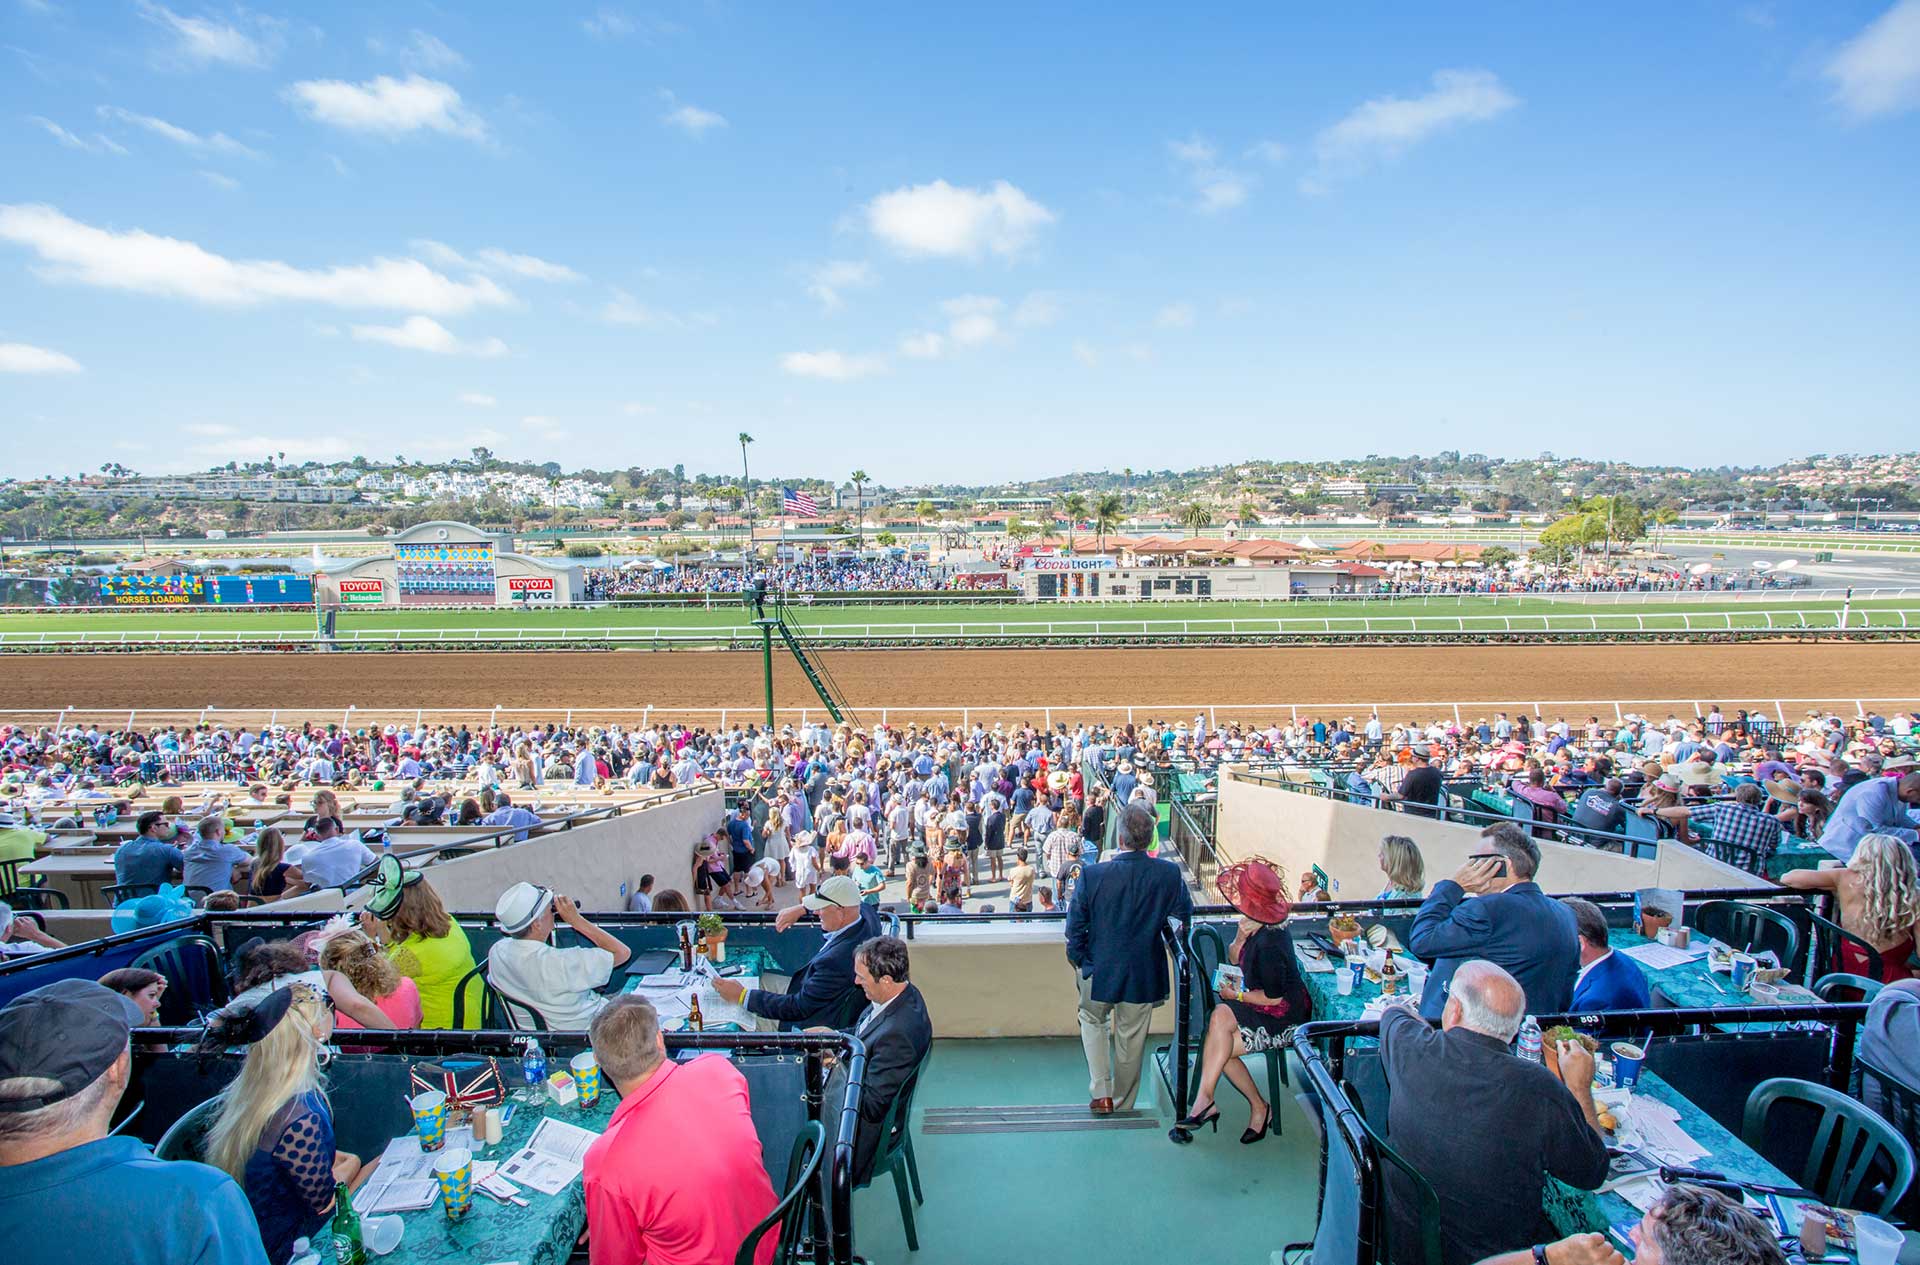 The Breeders’ Cup Return to Del Mar Fairgrounds Where “The Turf Meets